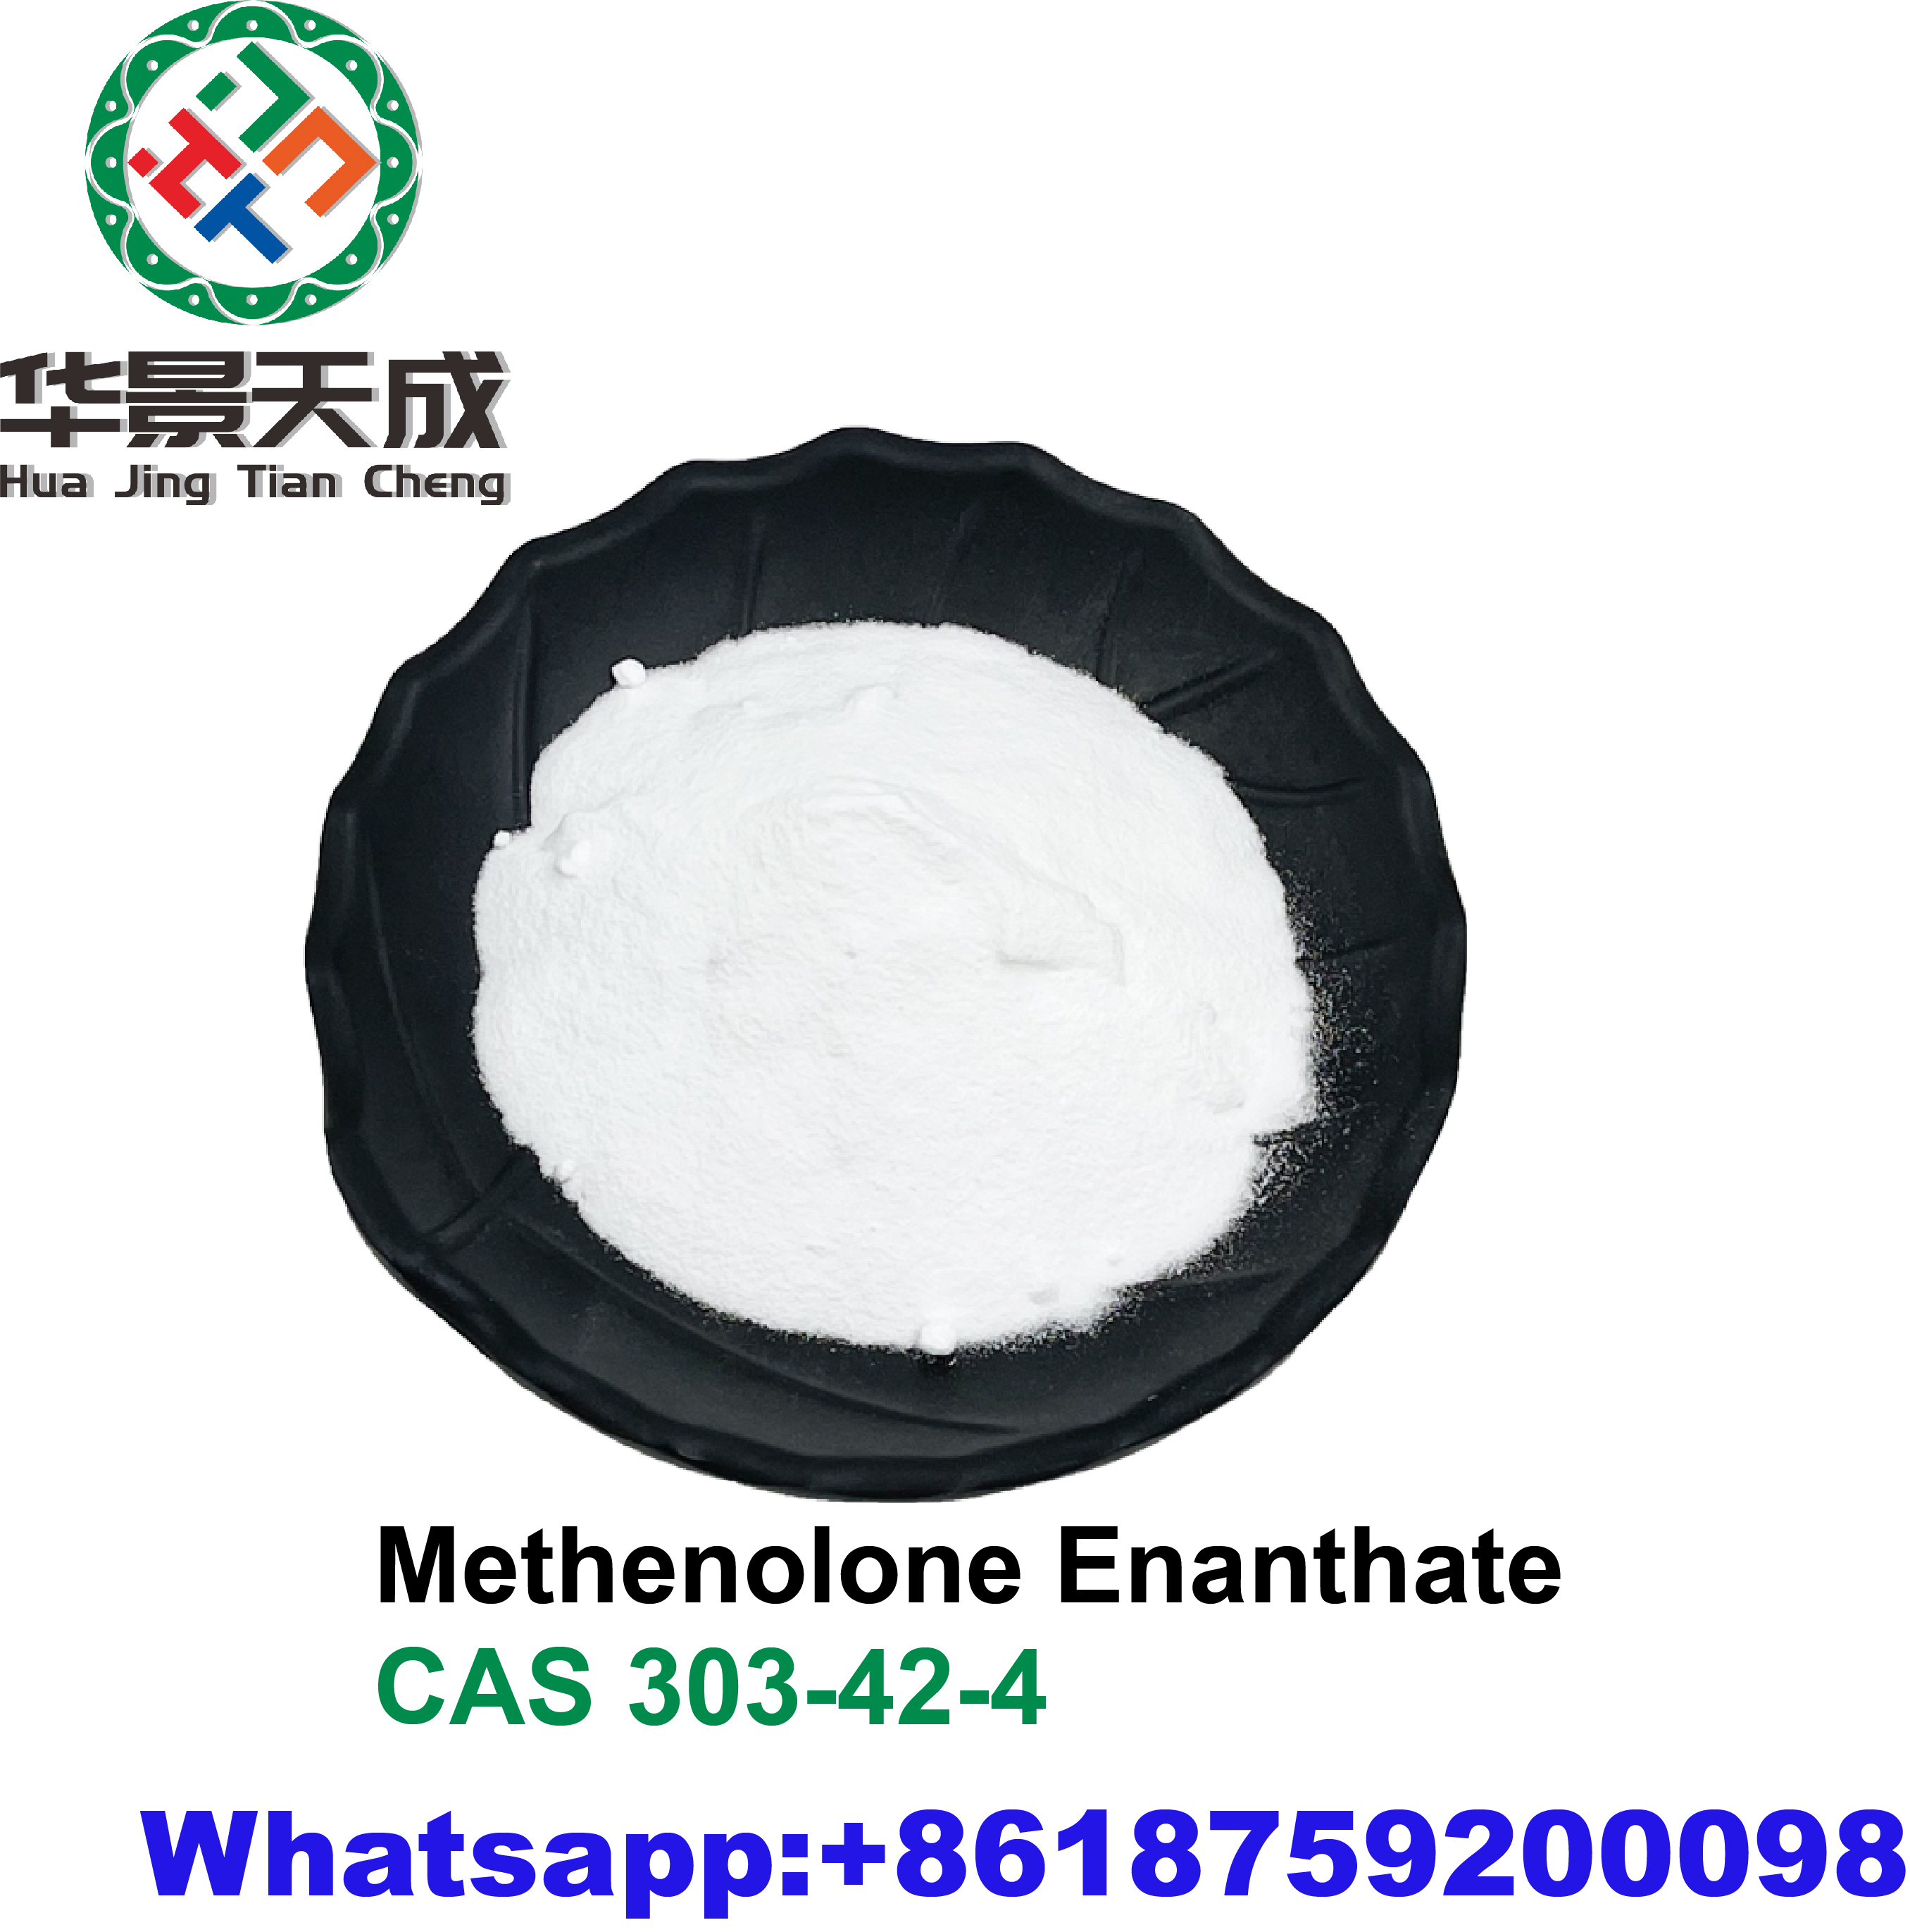 Methenolone Enanthate Powder Bulking Injectable Primobolan E For Fitness CAS 303-42-4 Featured Image